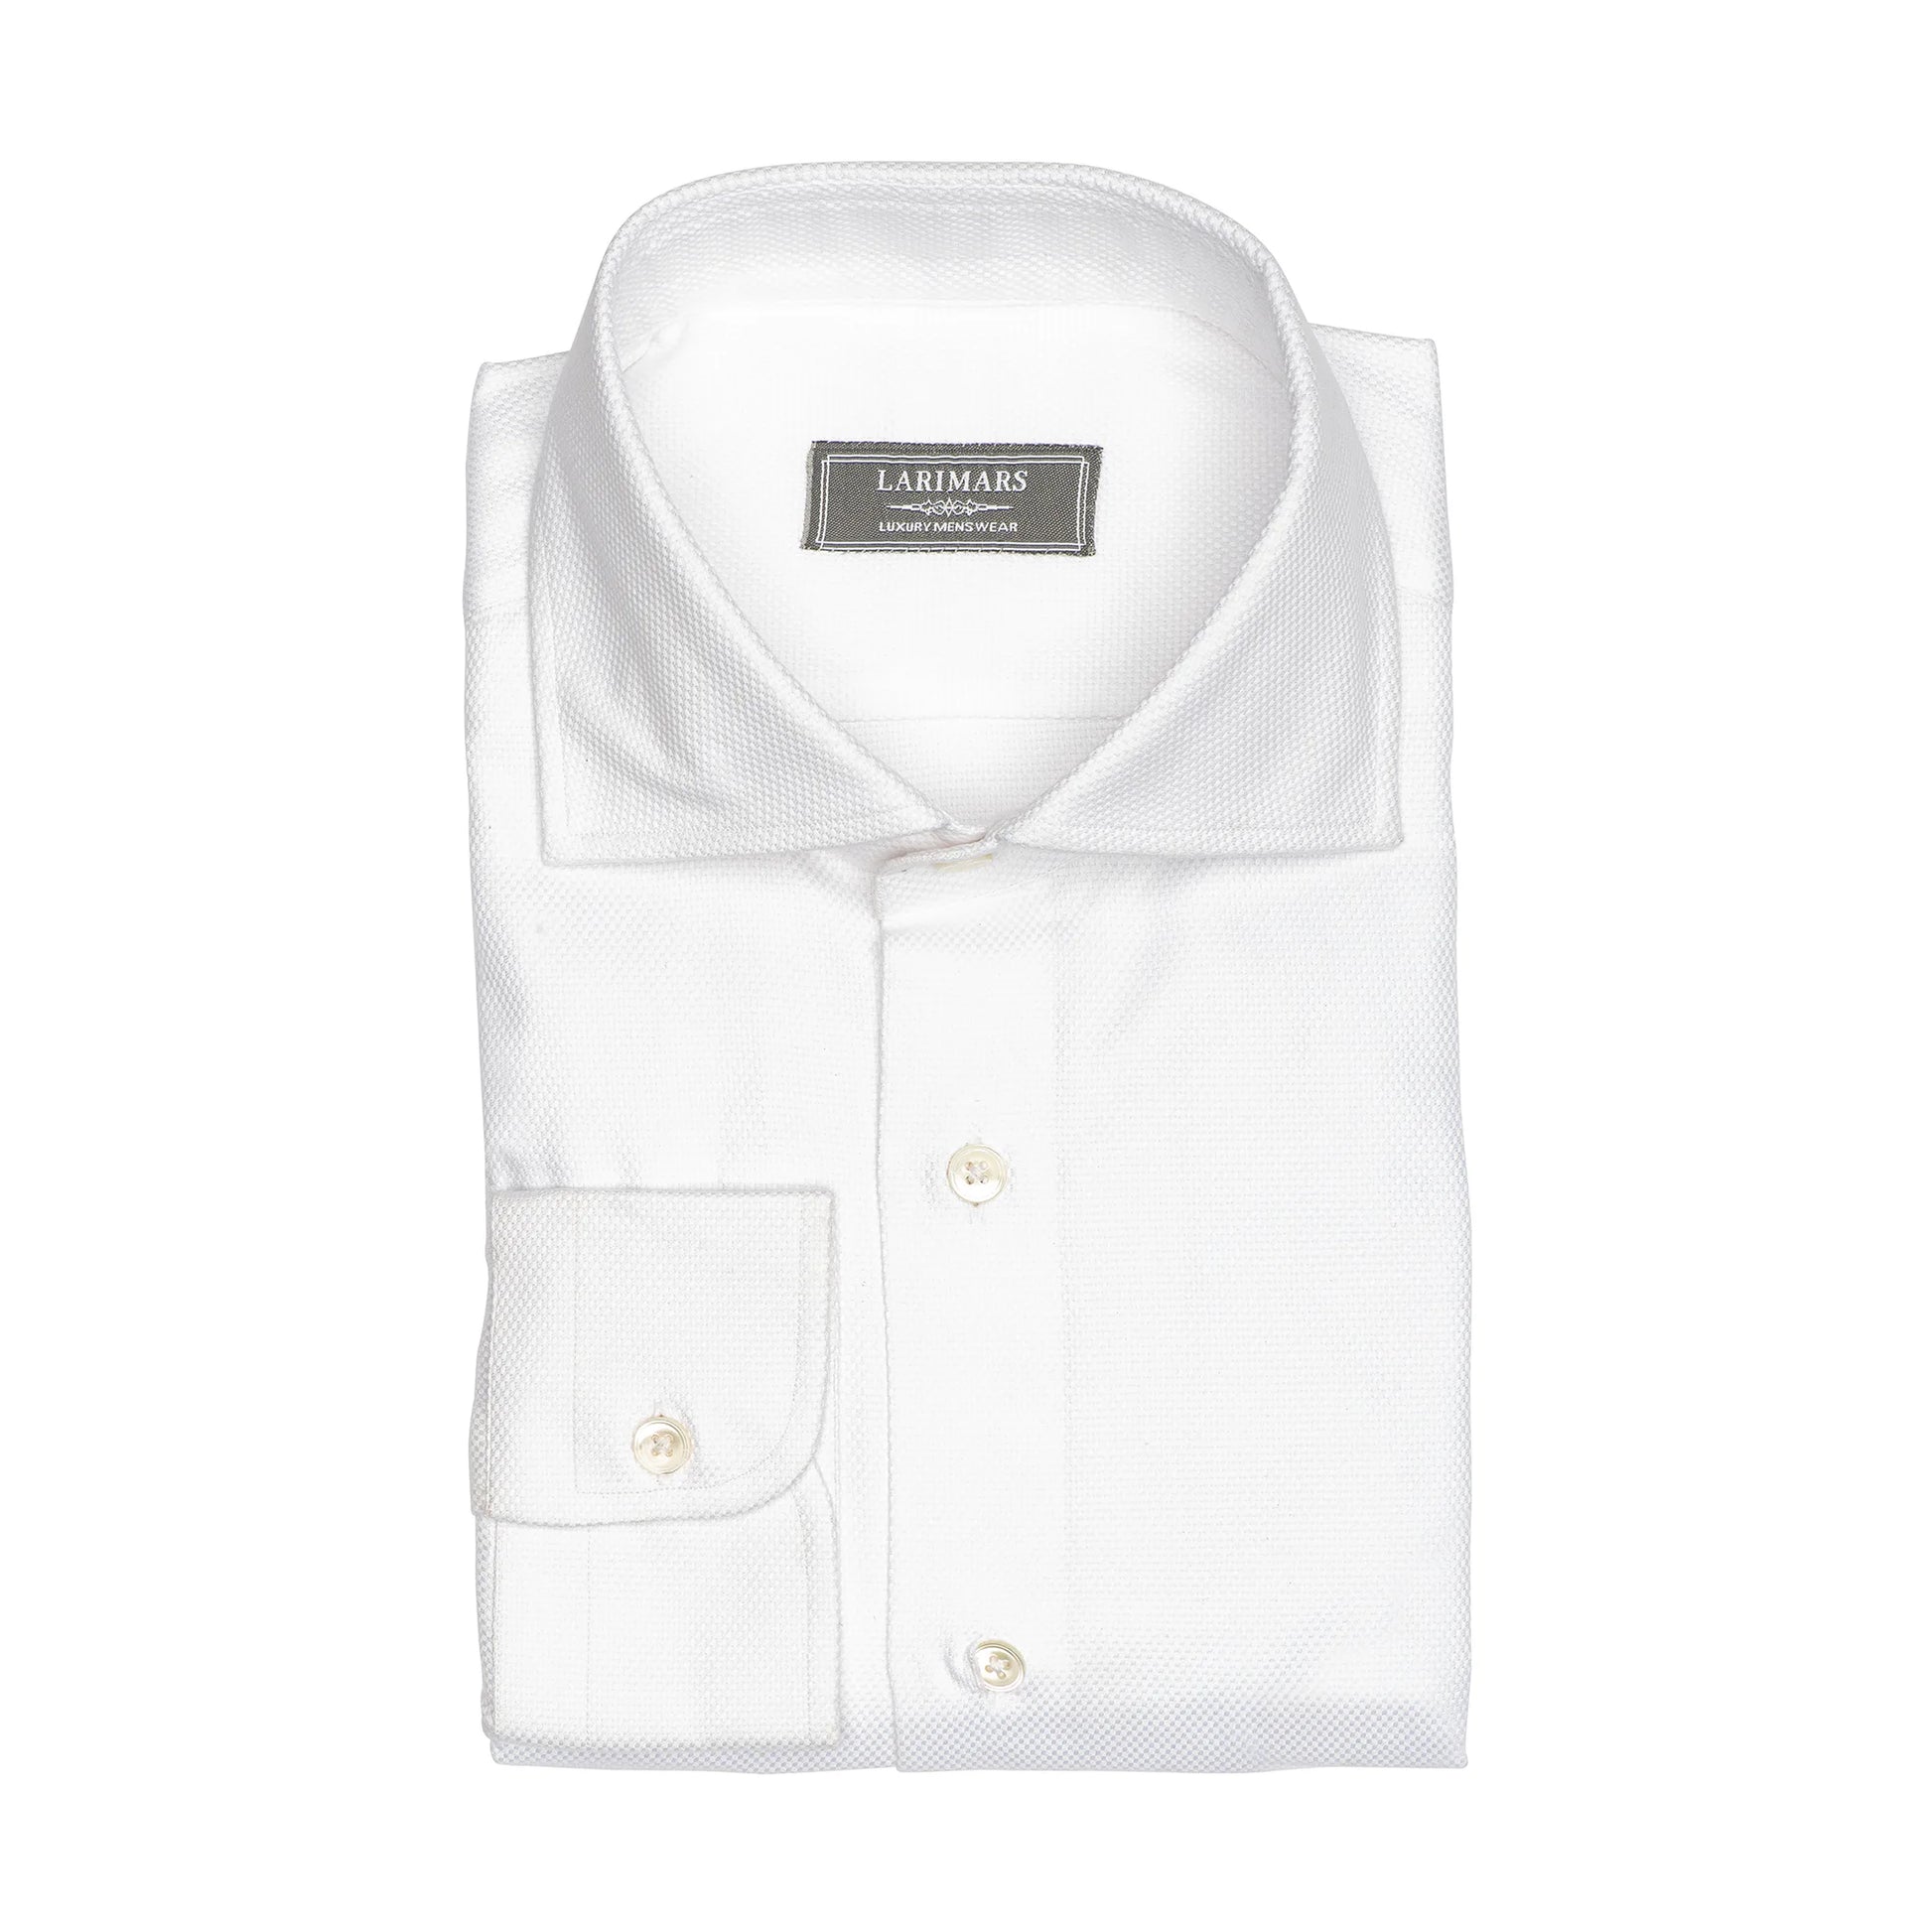 White Dobby Texture - Larimars Clothing Men's Formal and casual wear shirts